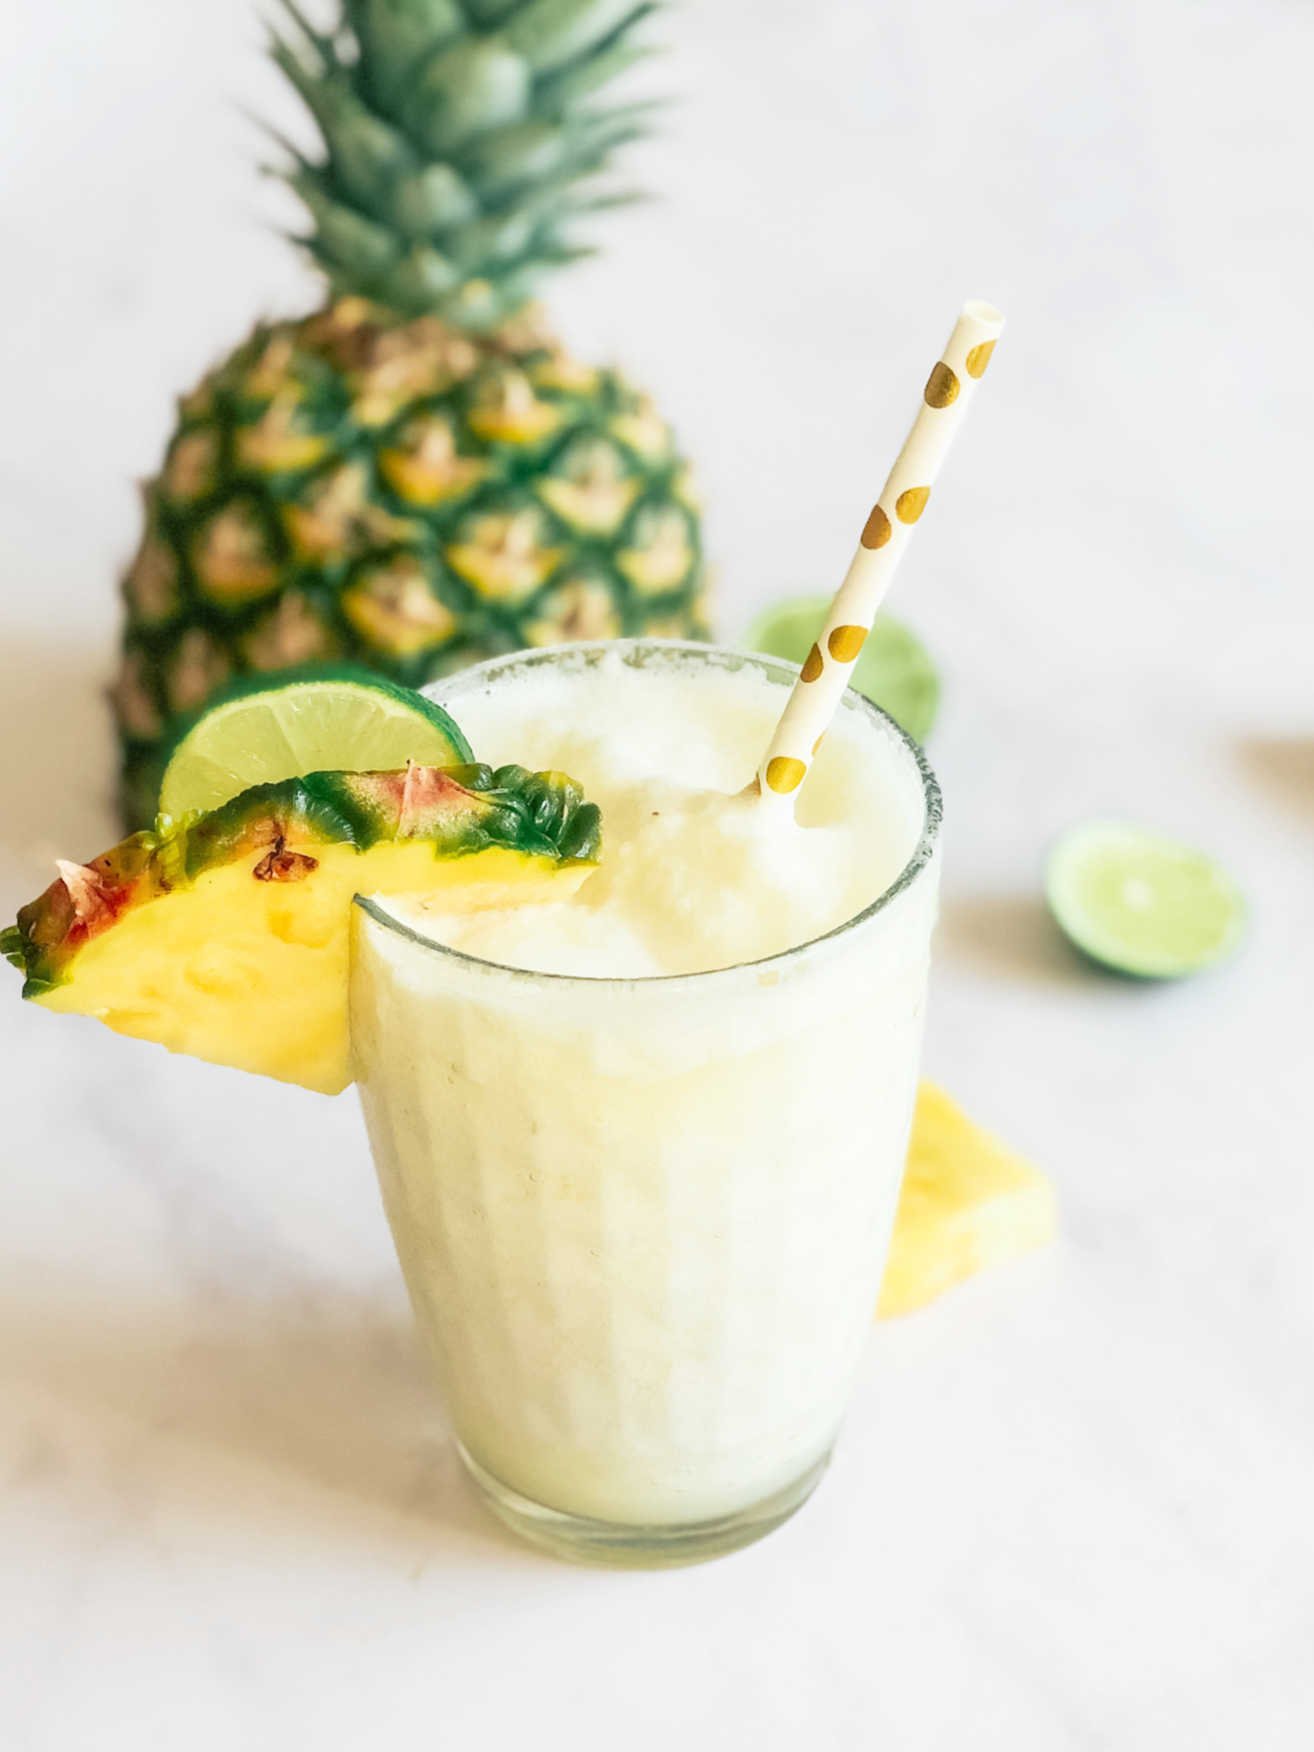 How to make the perfect low fat Pina colada